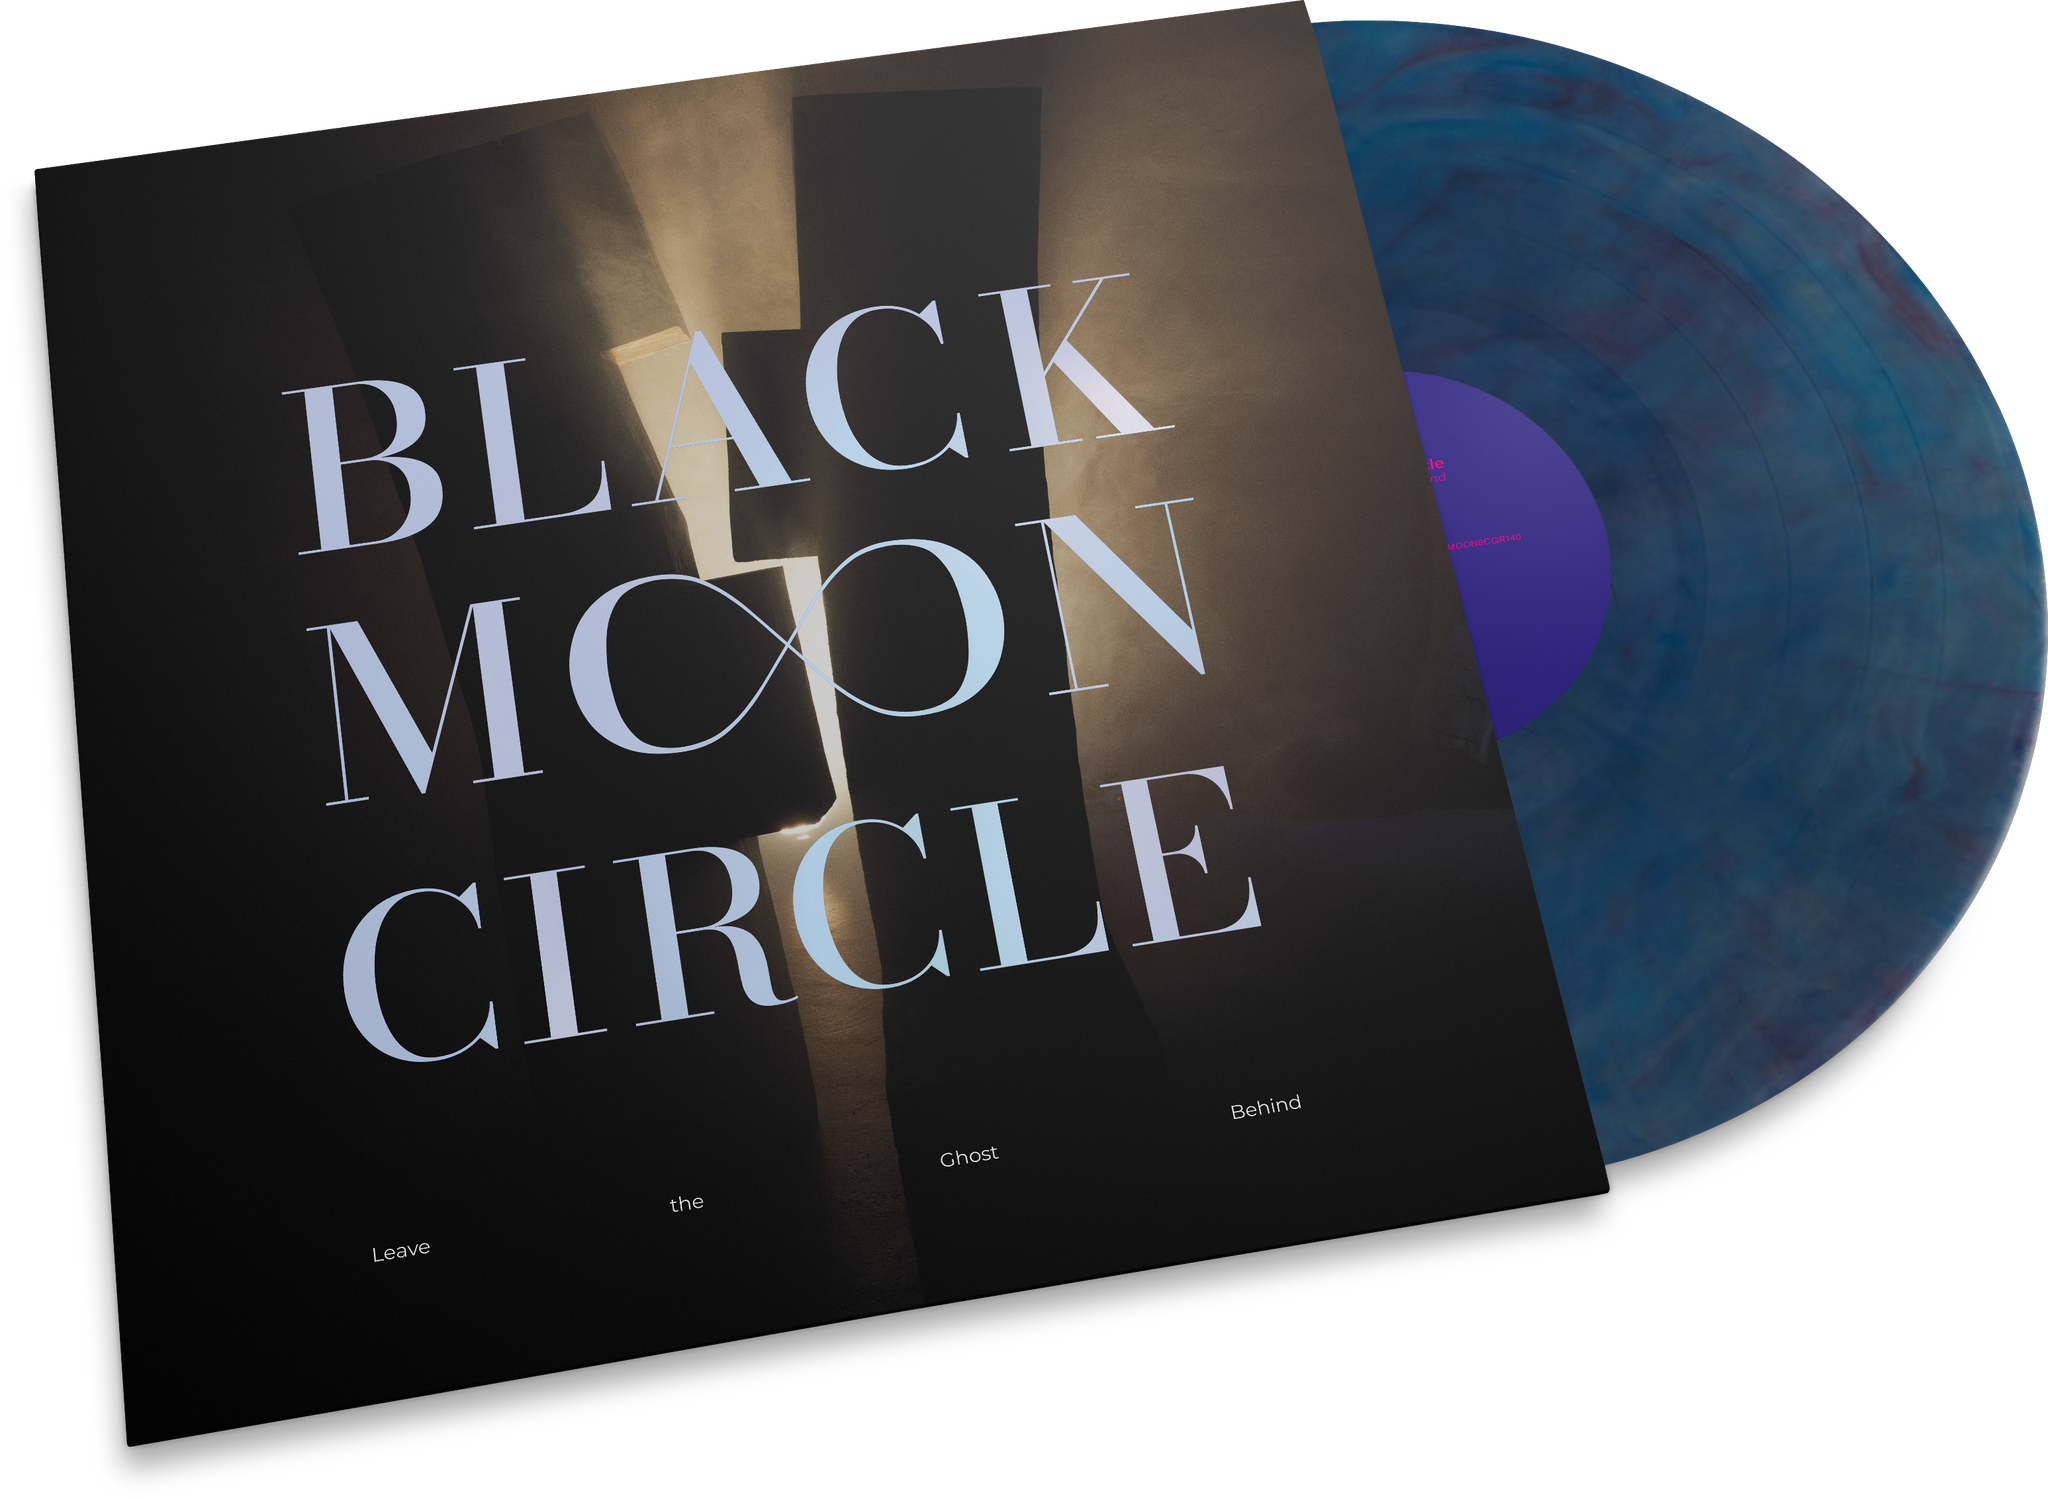 Black Moon Circle - "Leave The Ghost Behind" (LTD 2x180G coloured vinyl / CD included)